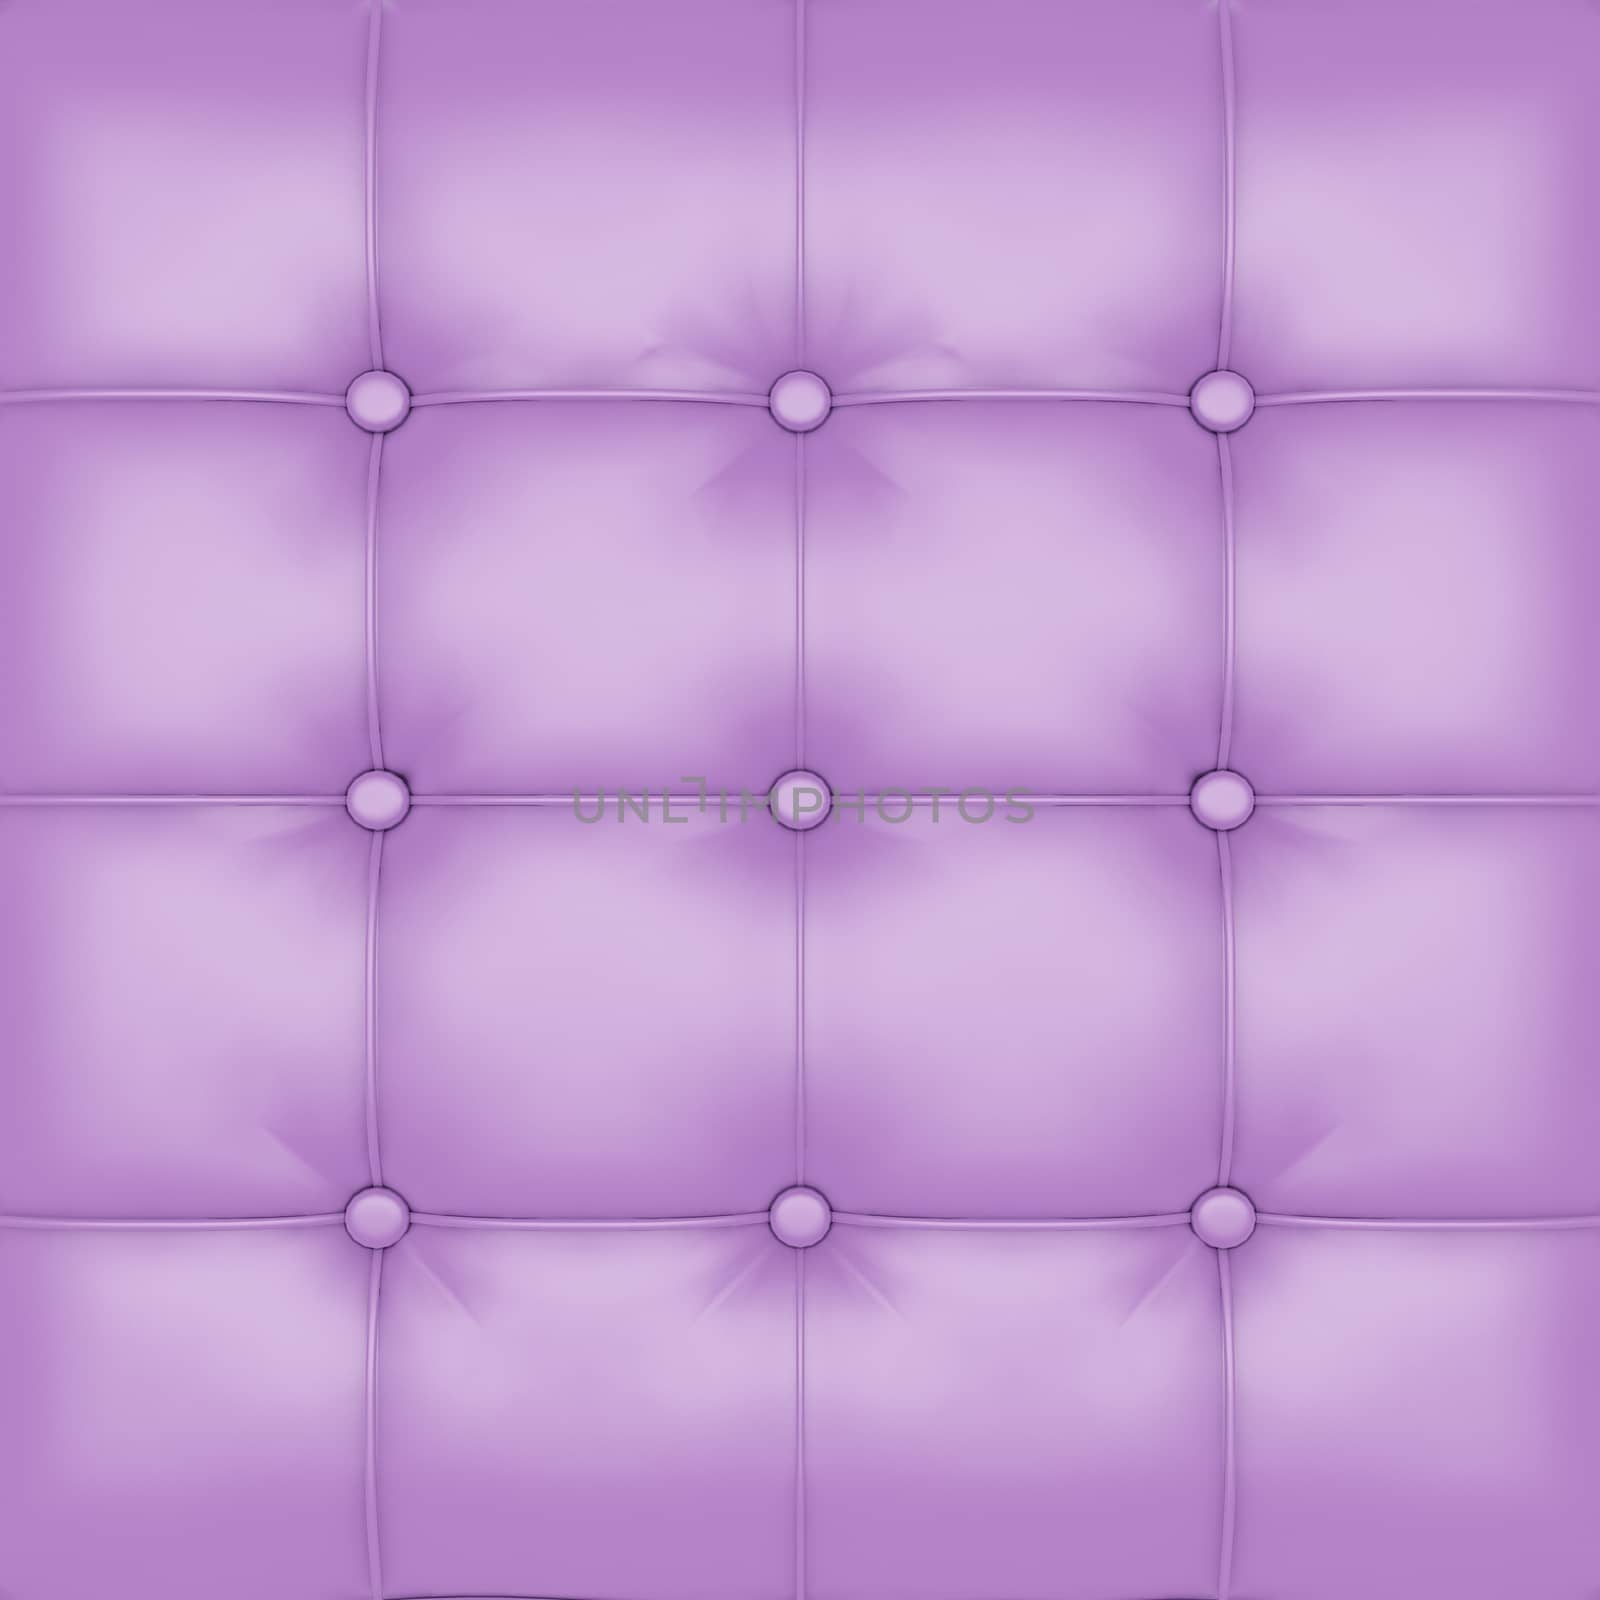 Violet Leather Upholstery Background